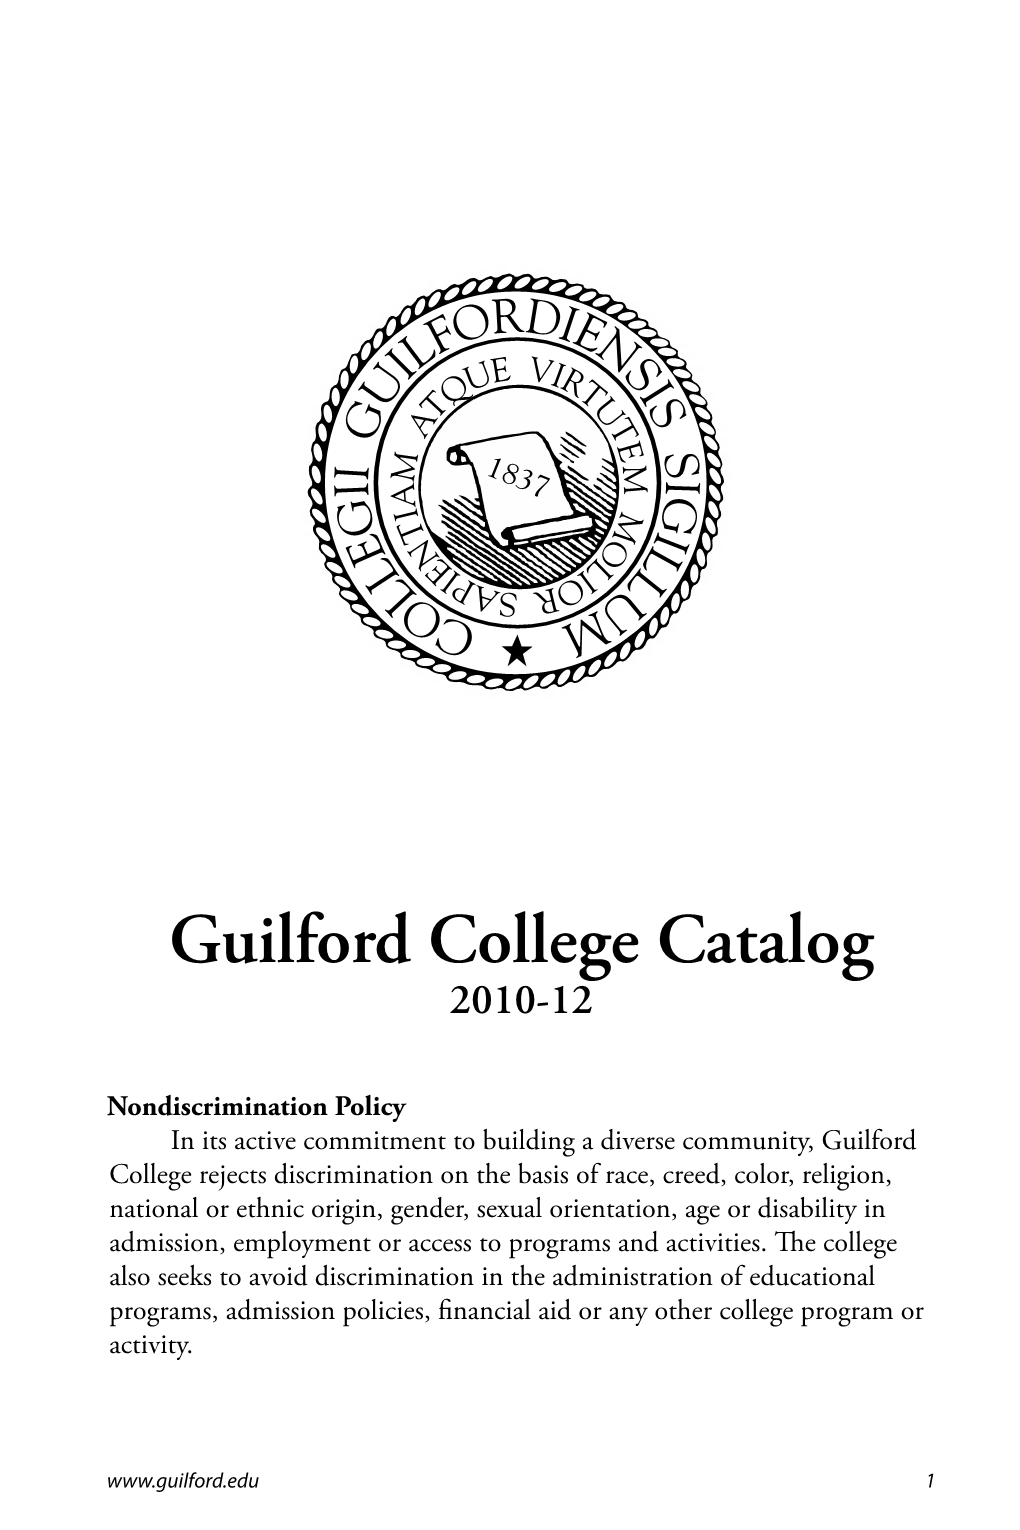 Guilford College Catalog 2010-12